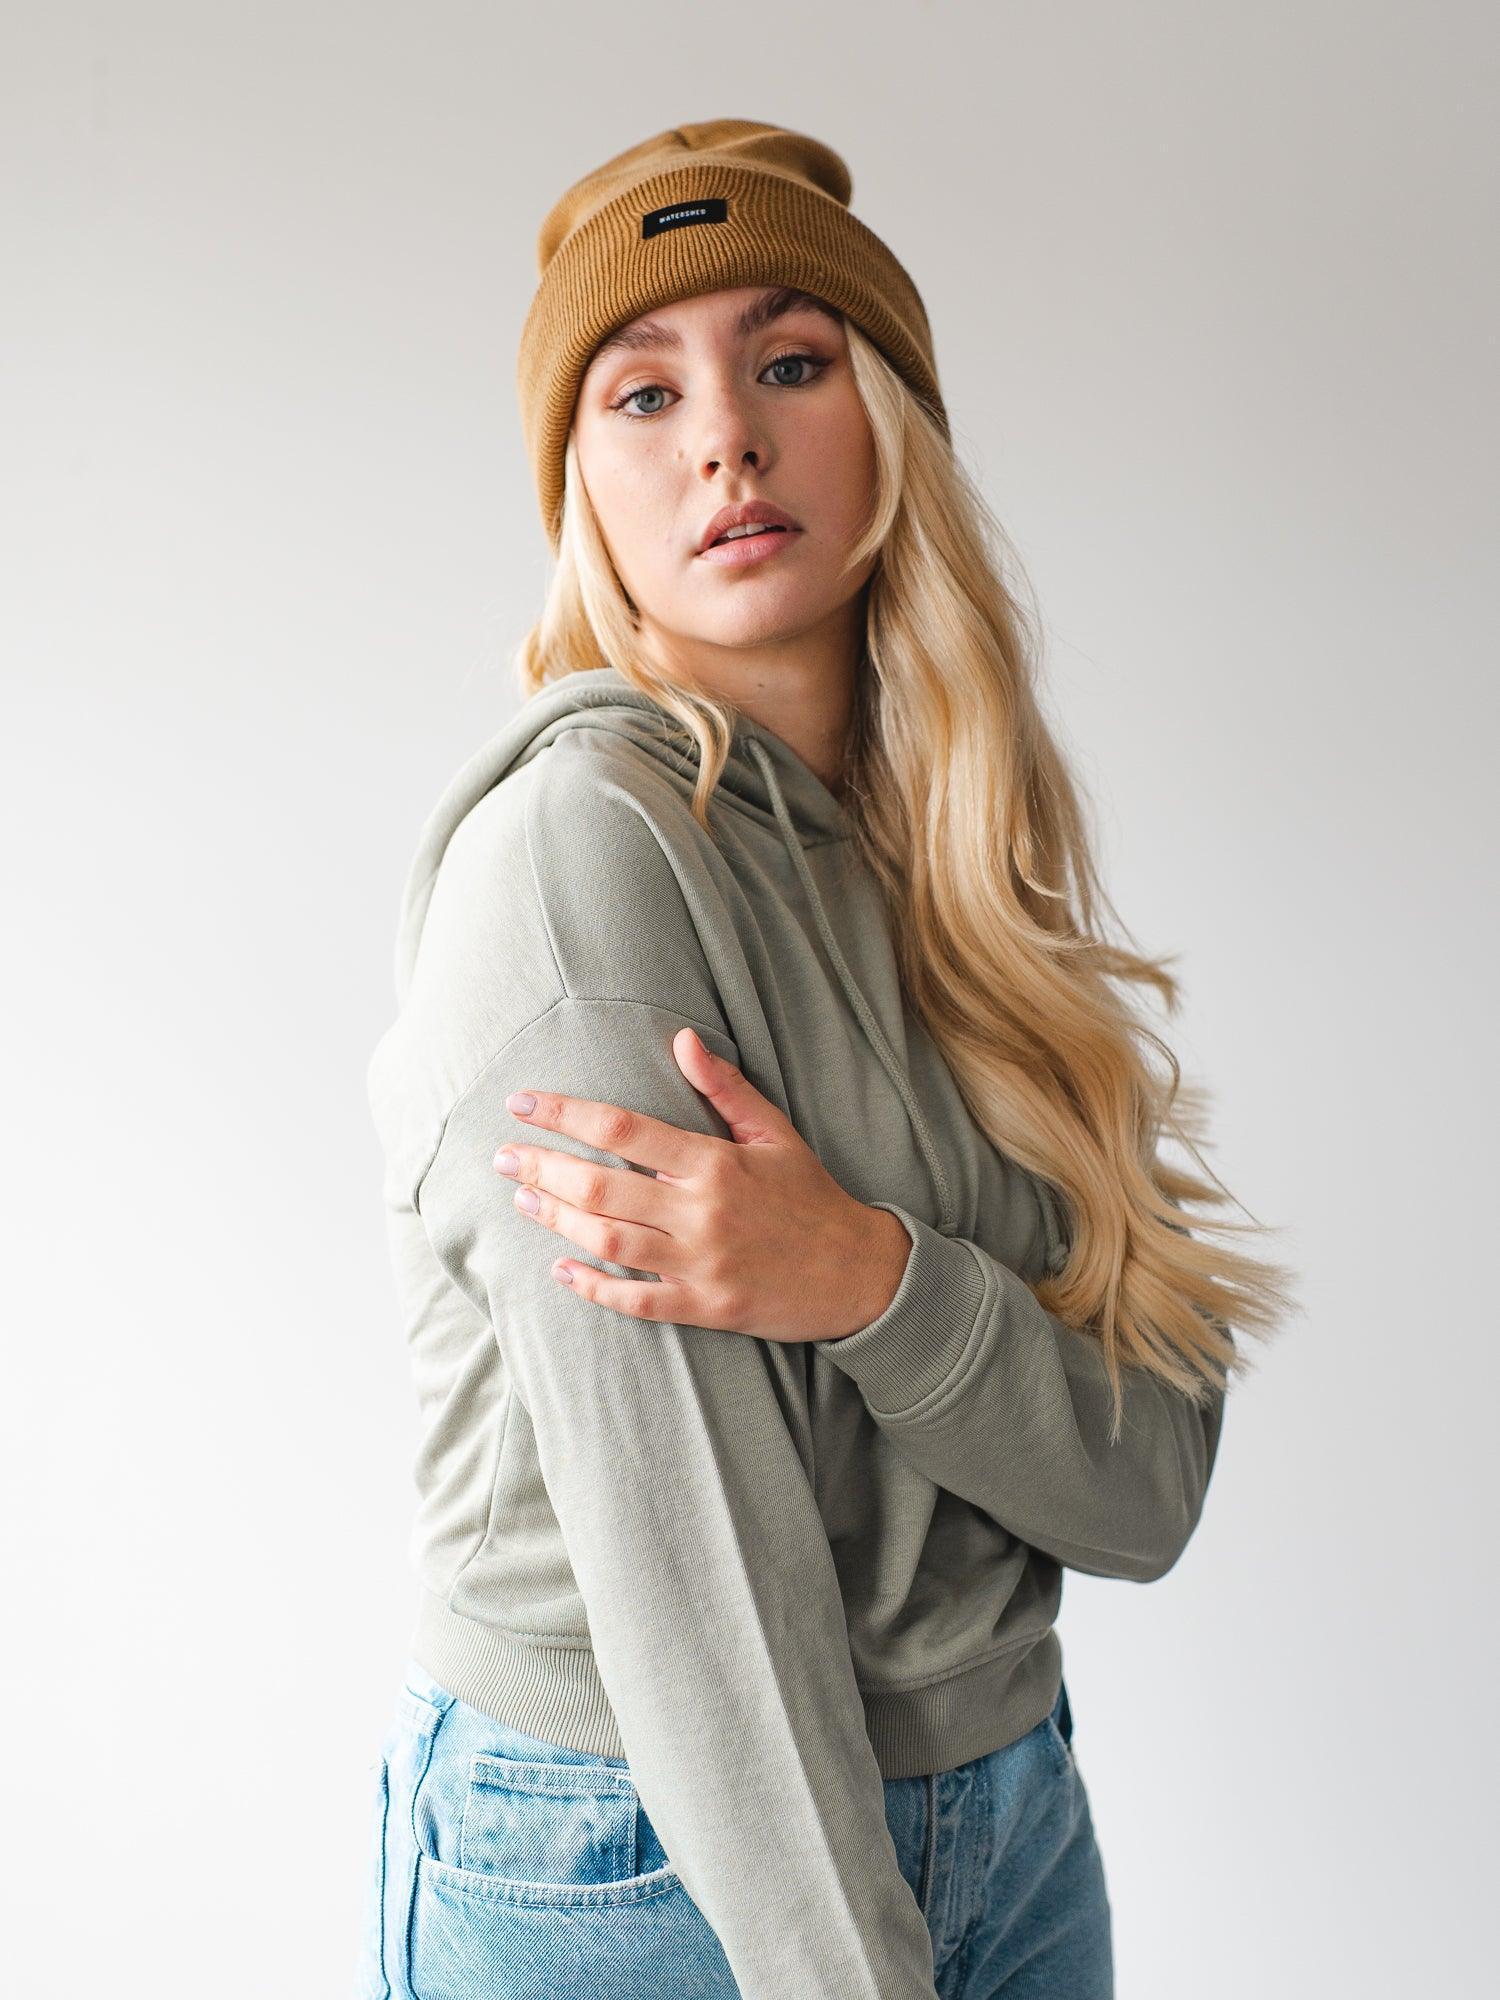 Caramel Beanie - Embrace warmth and sophistication with this delightful caramel-colored beanie, a chic addition to your winter wardrobe.